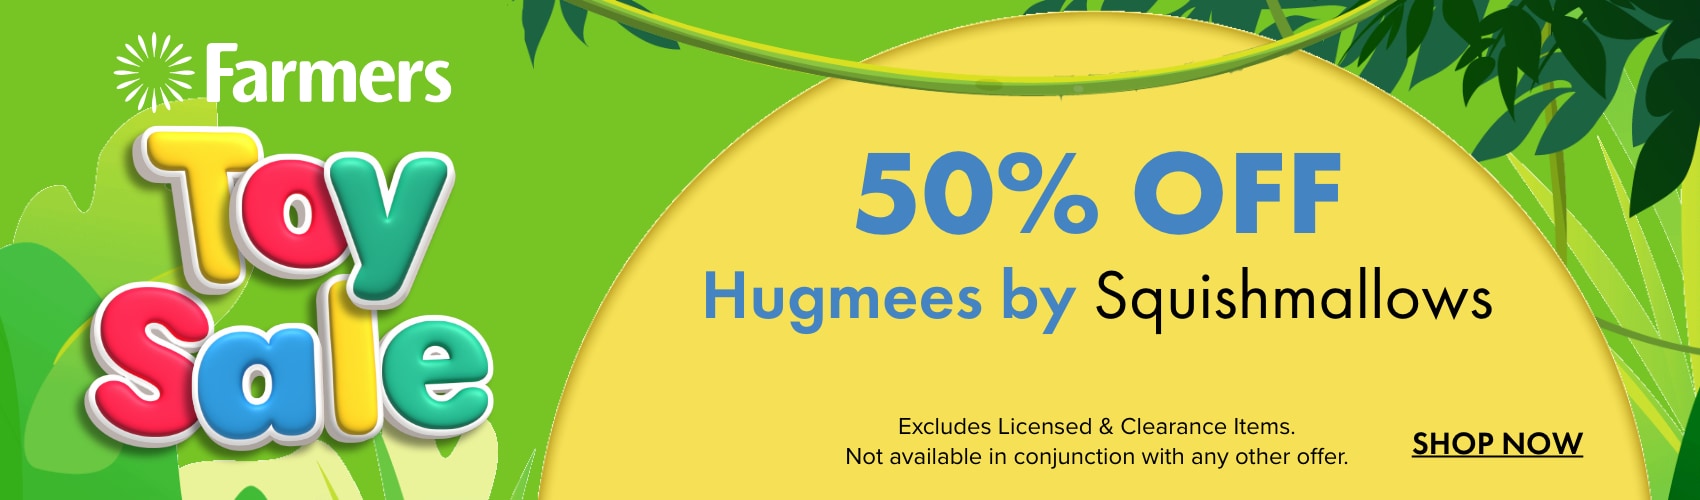 50% OFF Hugmees by Squishmallows